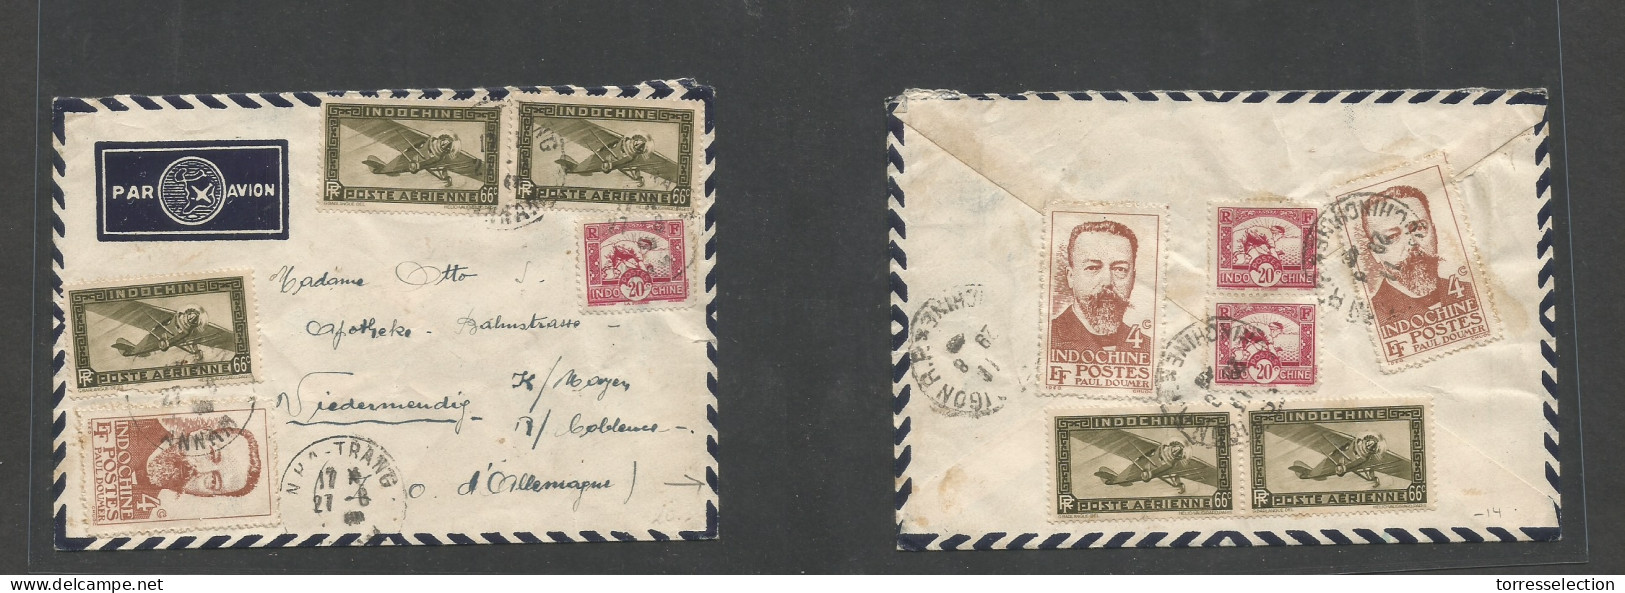 INDOCHINA. C. 1932. Nha Trang - Germany, Viedermendig. Air Multifkd Front And Reverse. Fine Used. - Altri - Asia